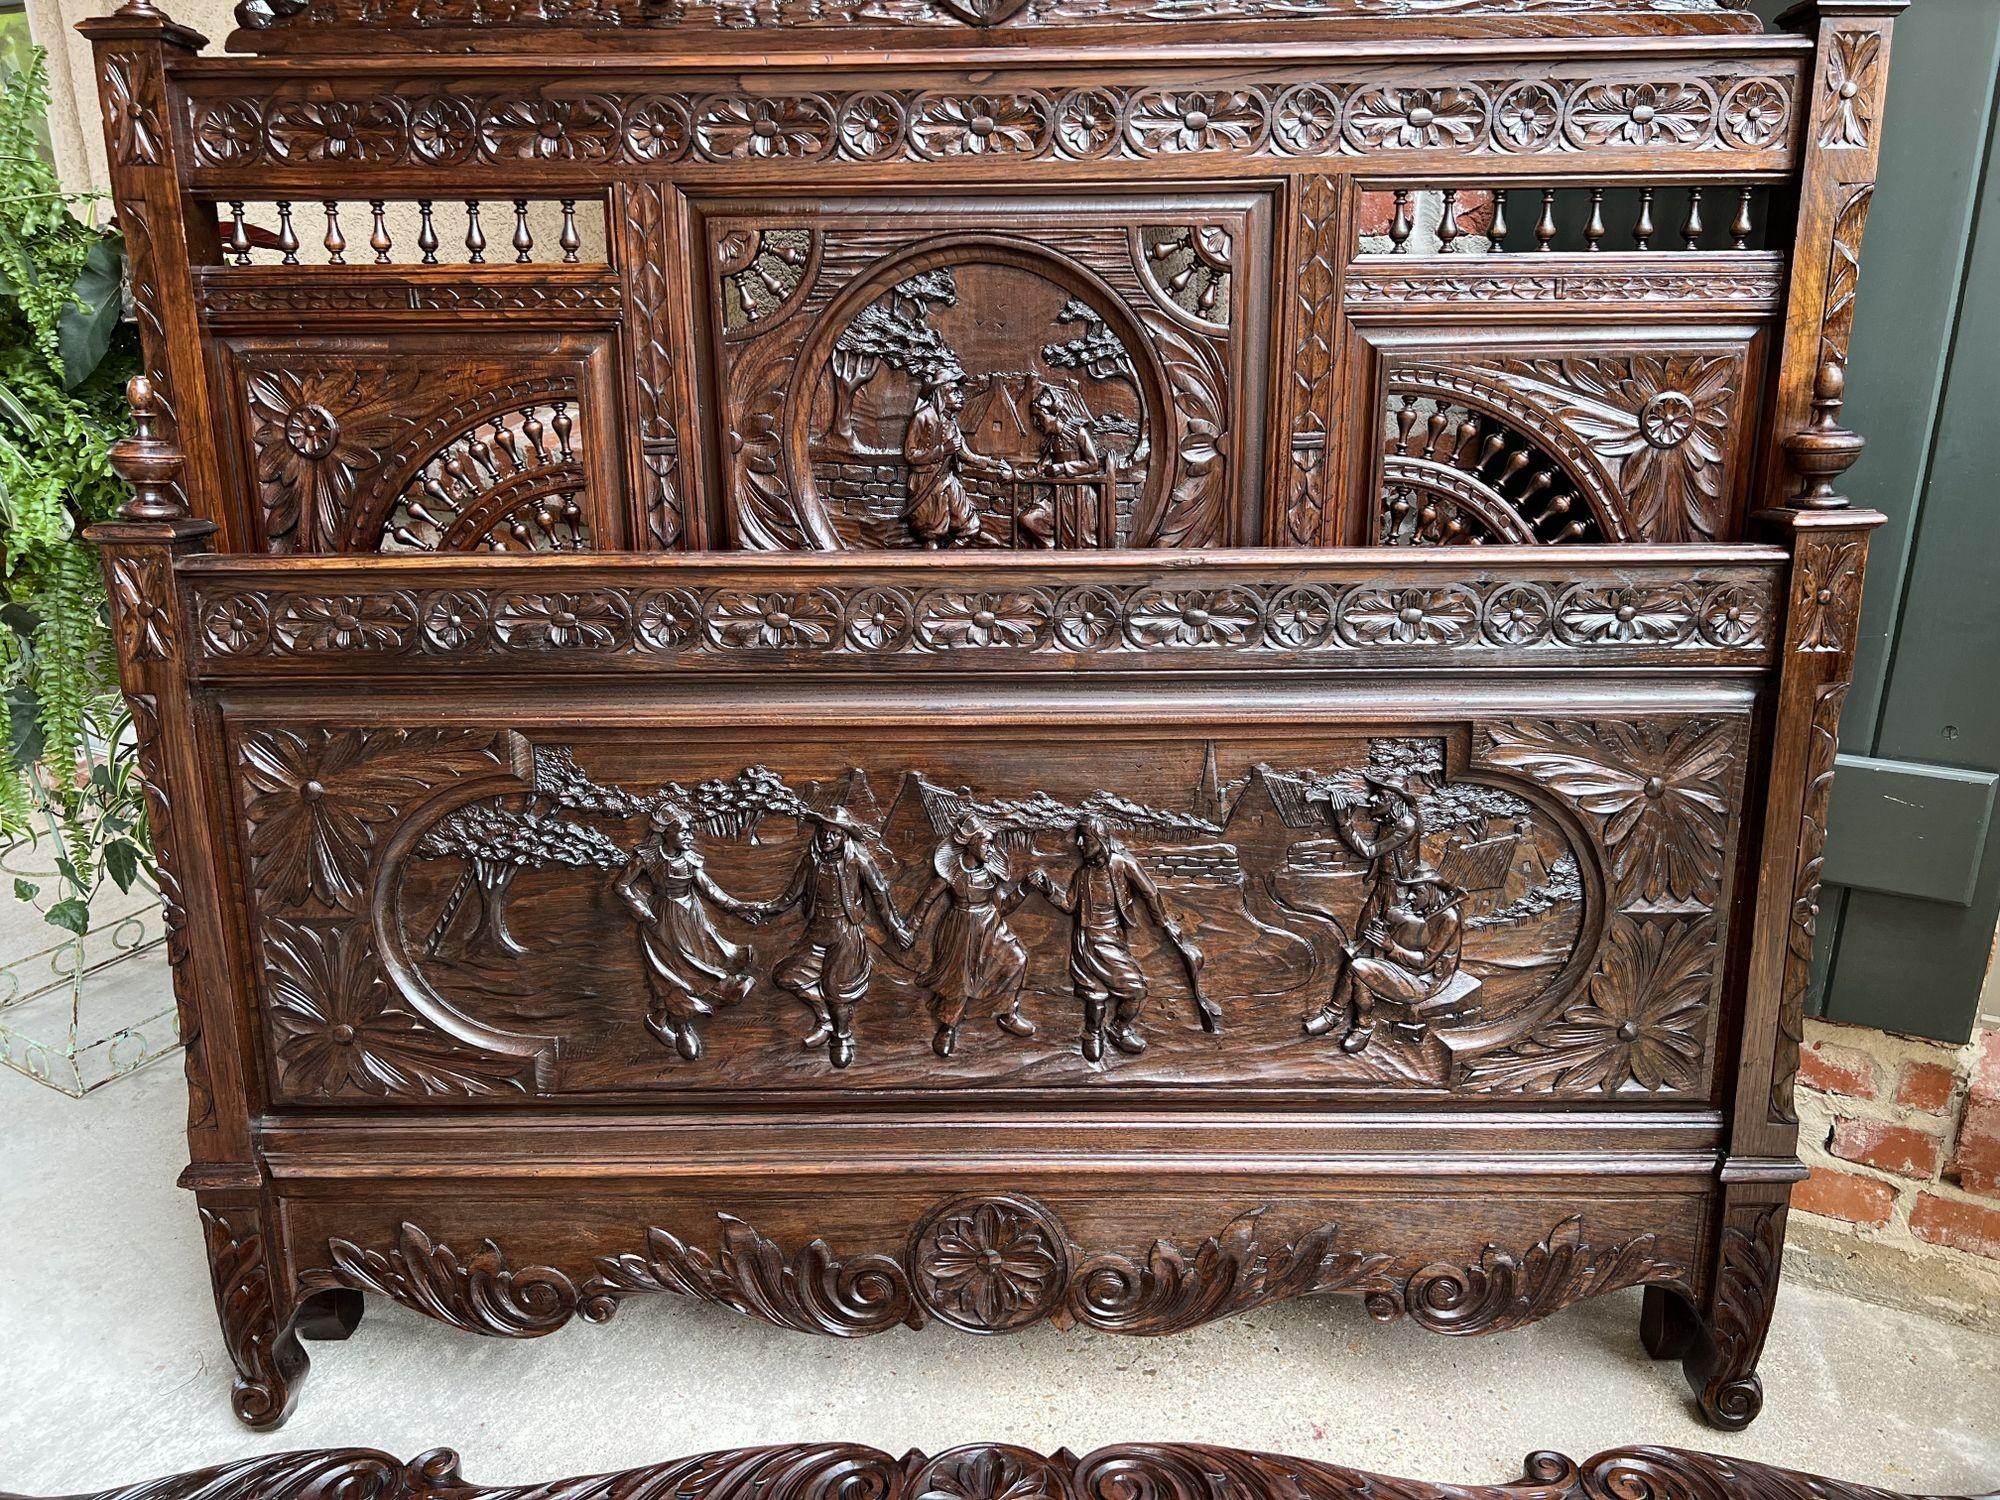 19th century French Breton bed carved Oak Brittany Wedding French Country.
 
Unique antique French bed, direct from the Brittany region, highly carved with details particular to the Breton style.
Most probably a commissioned piece for the wedding